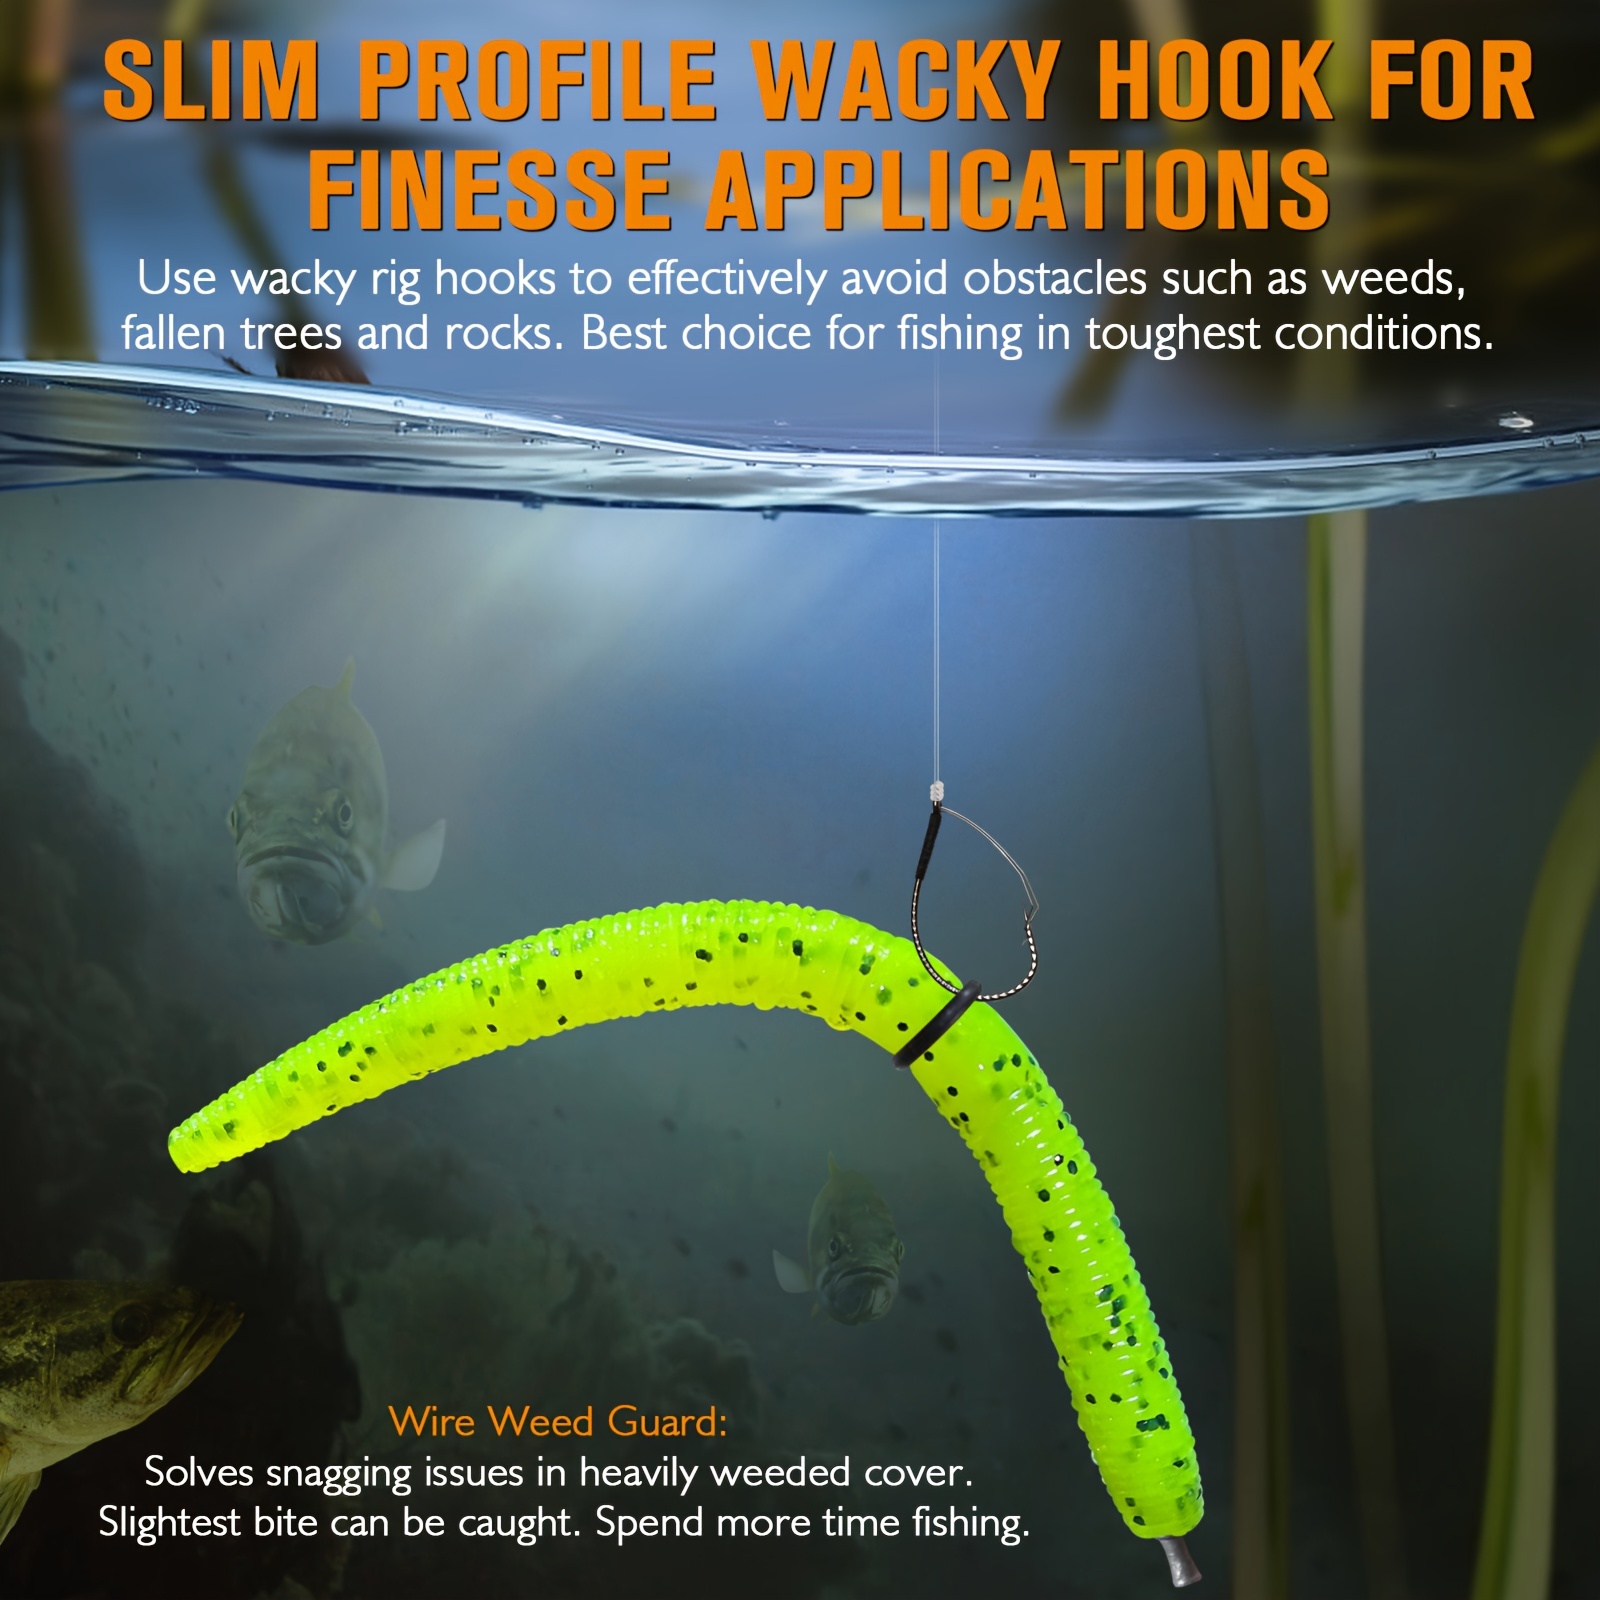 SILANON Weedless Wacky Worm Hooks,30Pcs Wacky Rig Fishing Hooks with Weed Guard Stainless Steel Wide Gap Hooks for Bass Soft Worm Baits Size 1/0 1 2 4